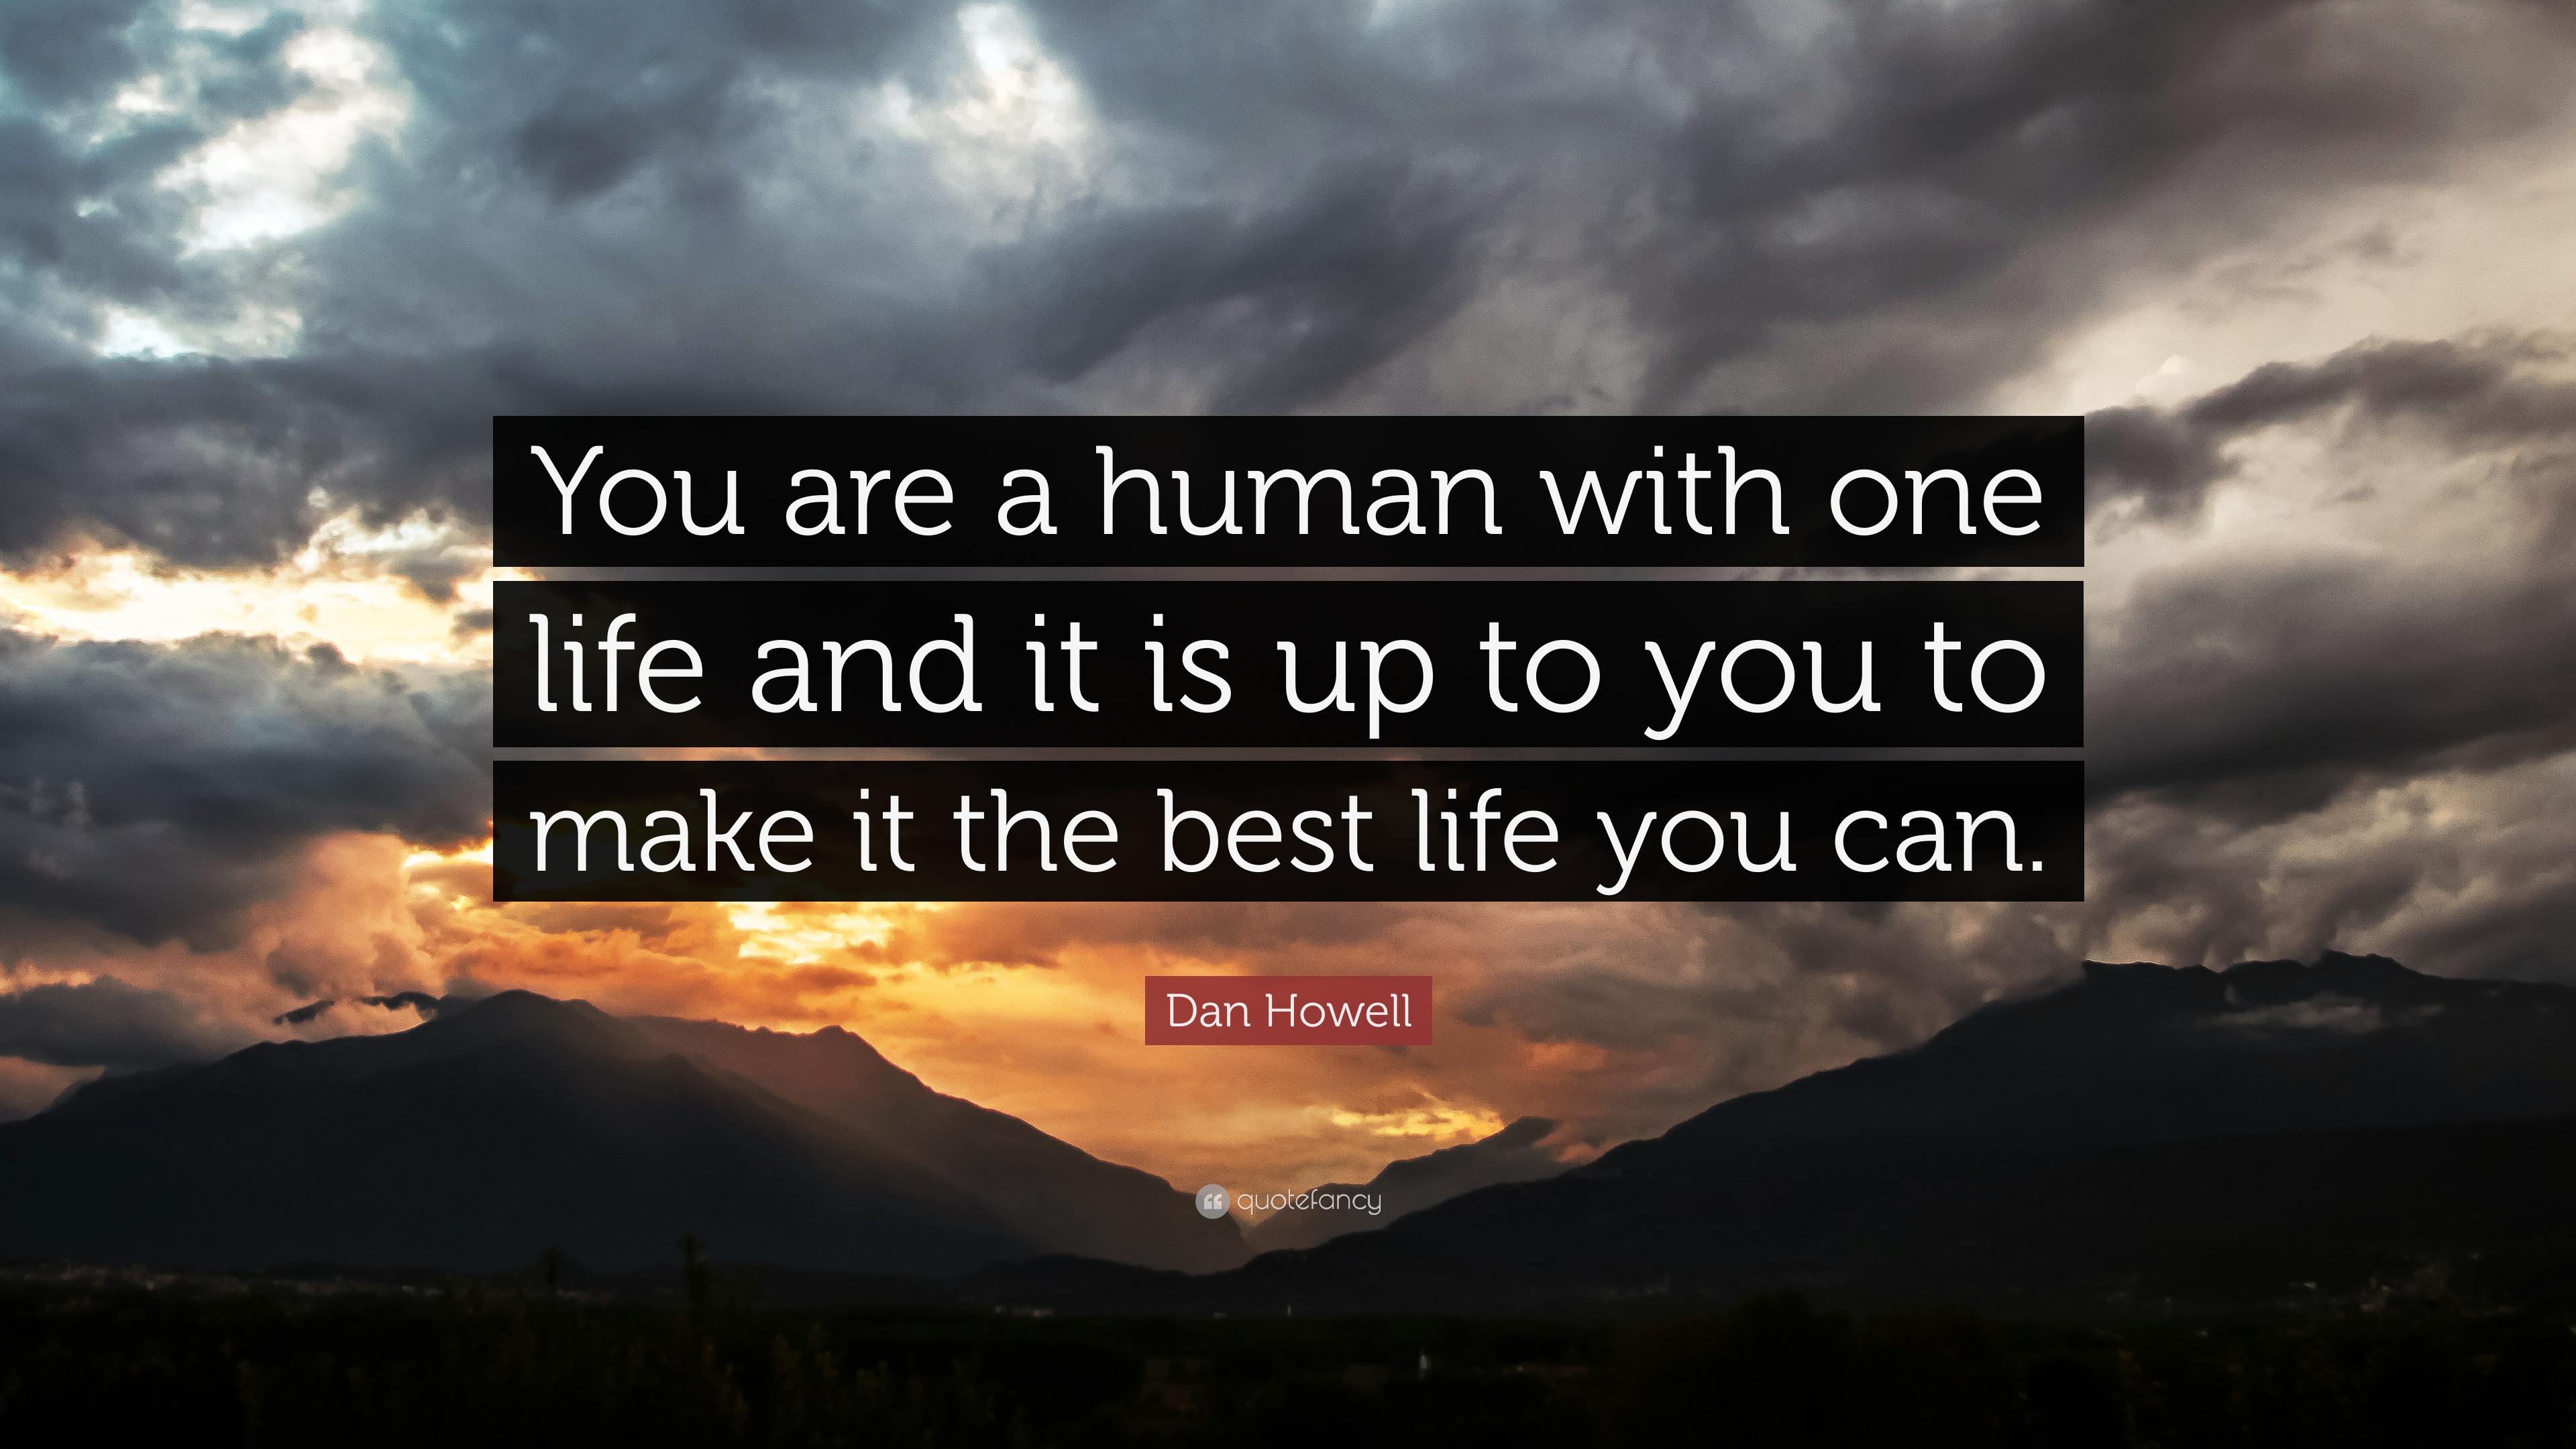 Dan Howell Quote: “You are a human with one life and it is up to you to